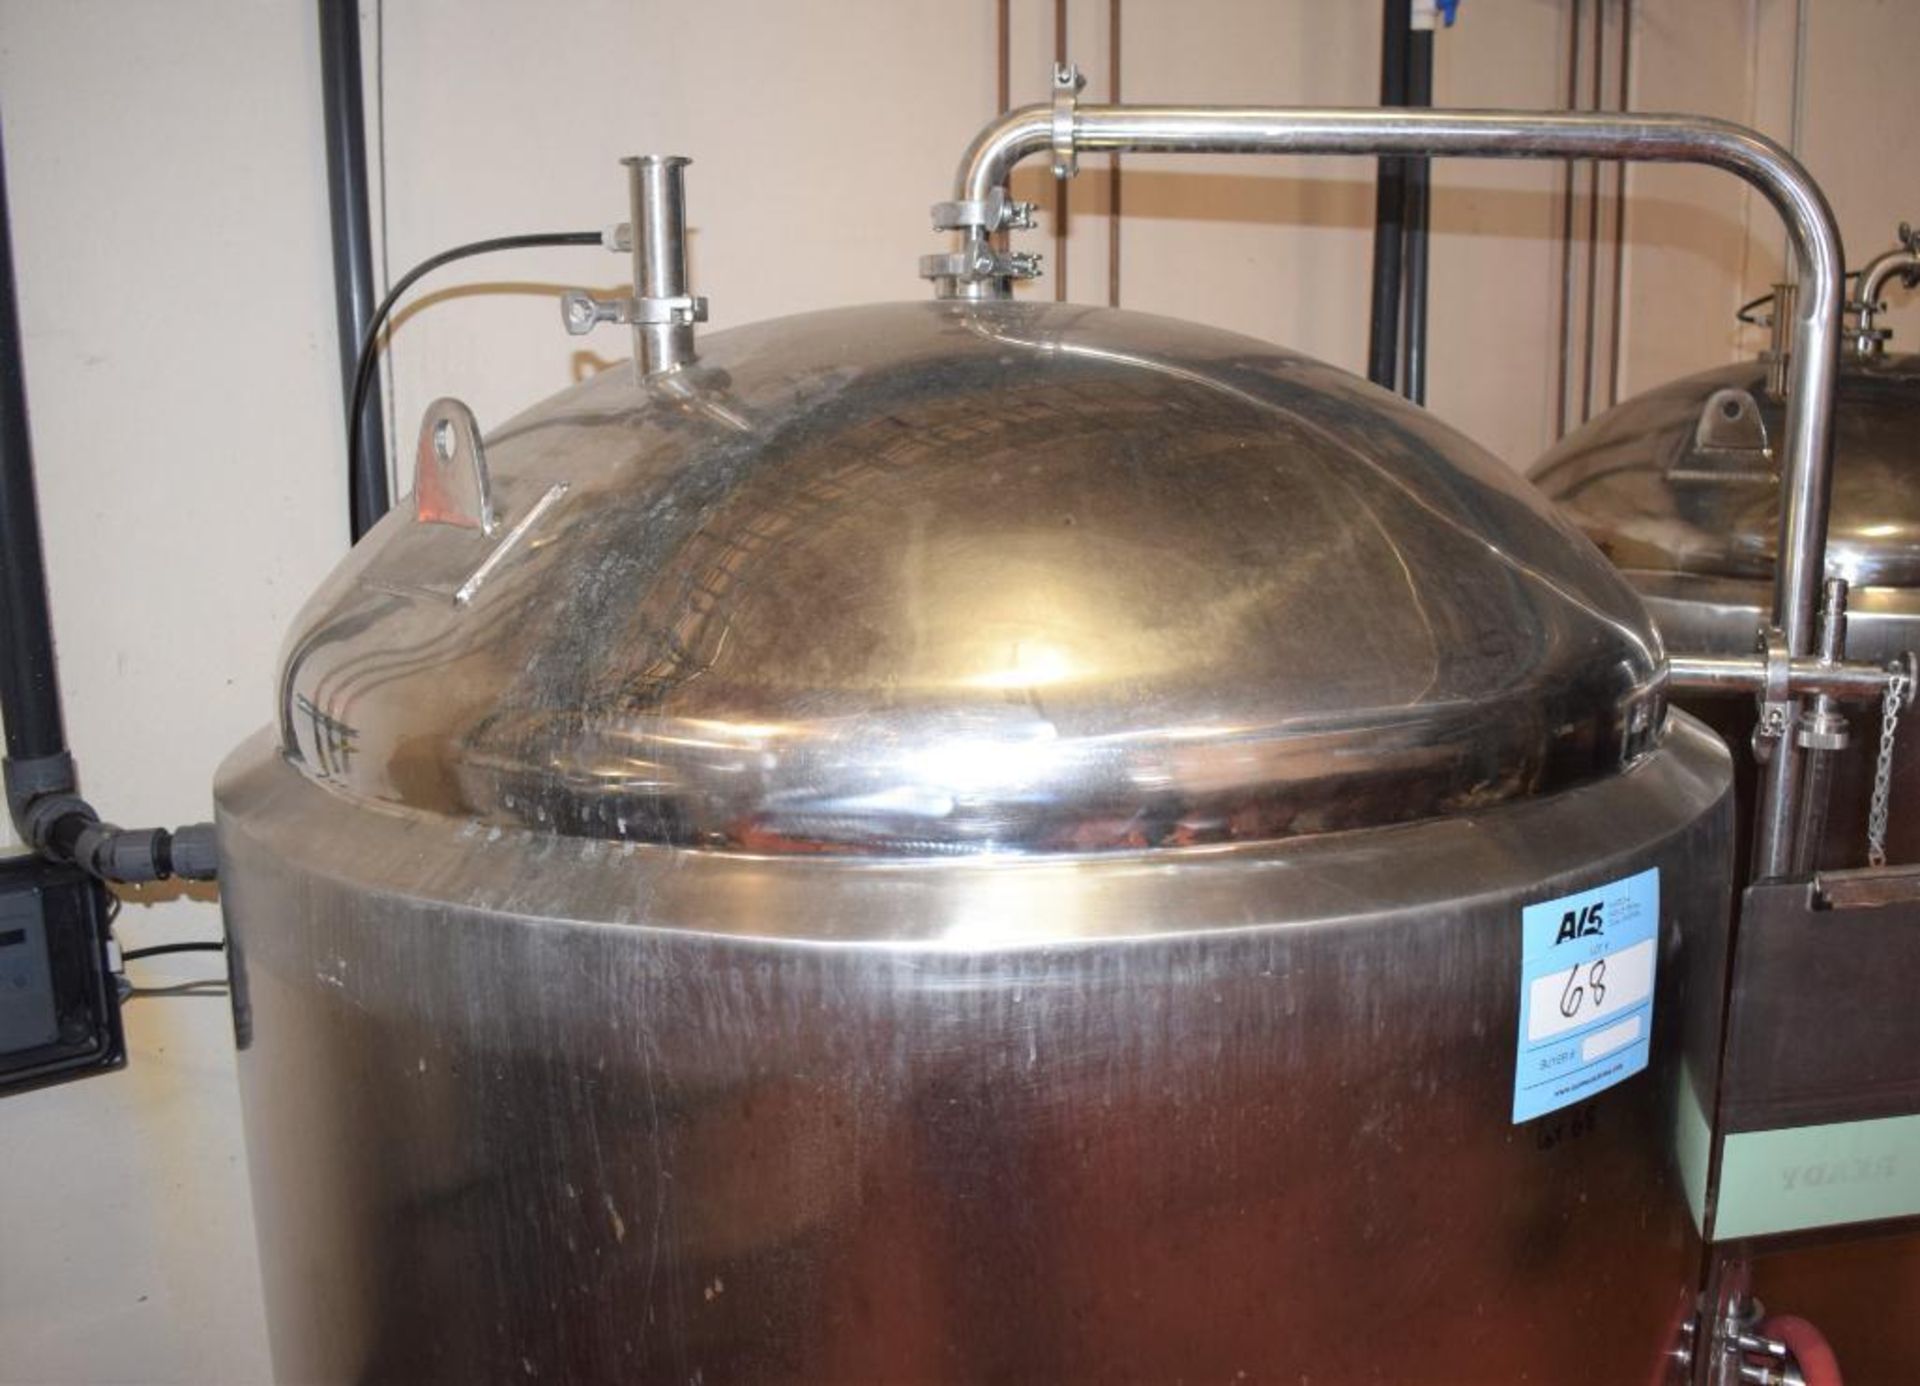 Glacier Jacketed Tank, Approximate 350 Gallon (10 BBL), Stainless Steel. Approximate 43.3 diameter x - Image 5 of 7